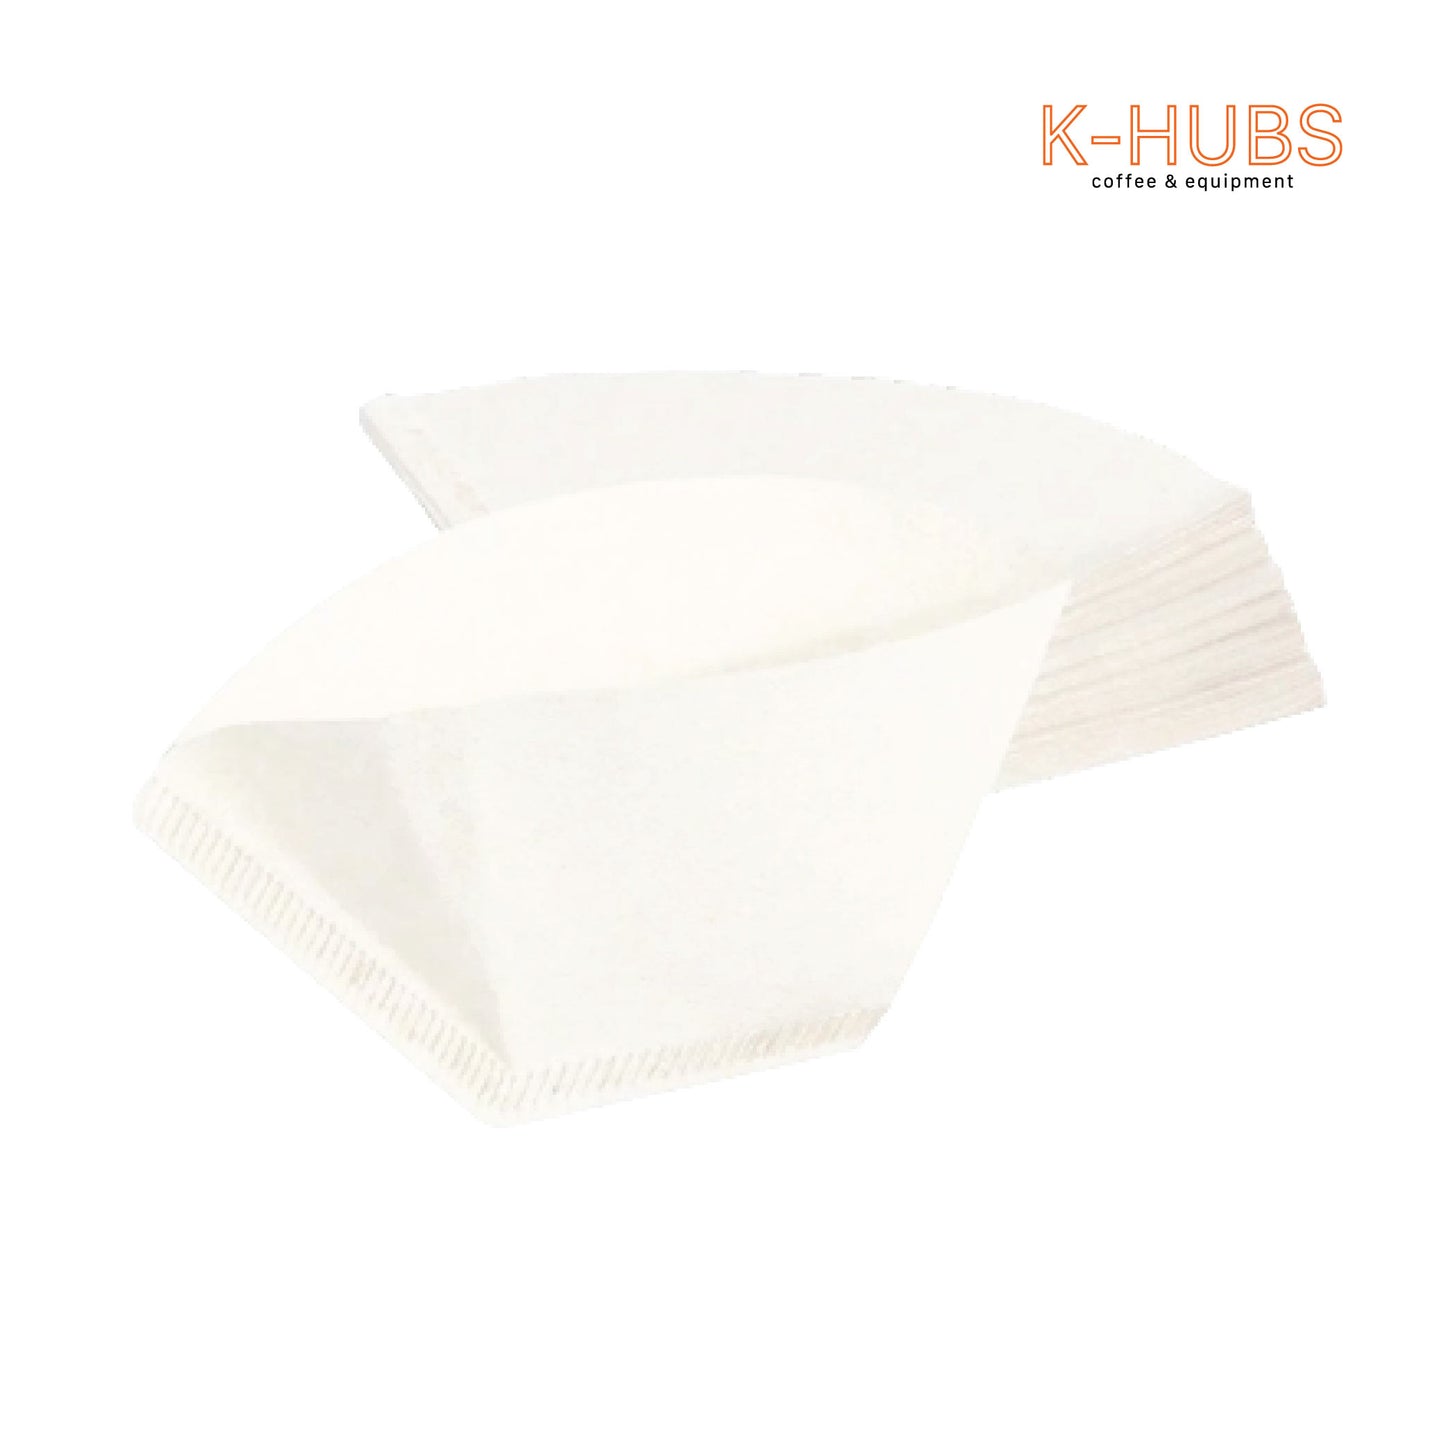 Cafec Abaca Filter Paper (TRAPEZOID) 3-5 CUPS